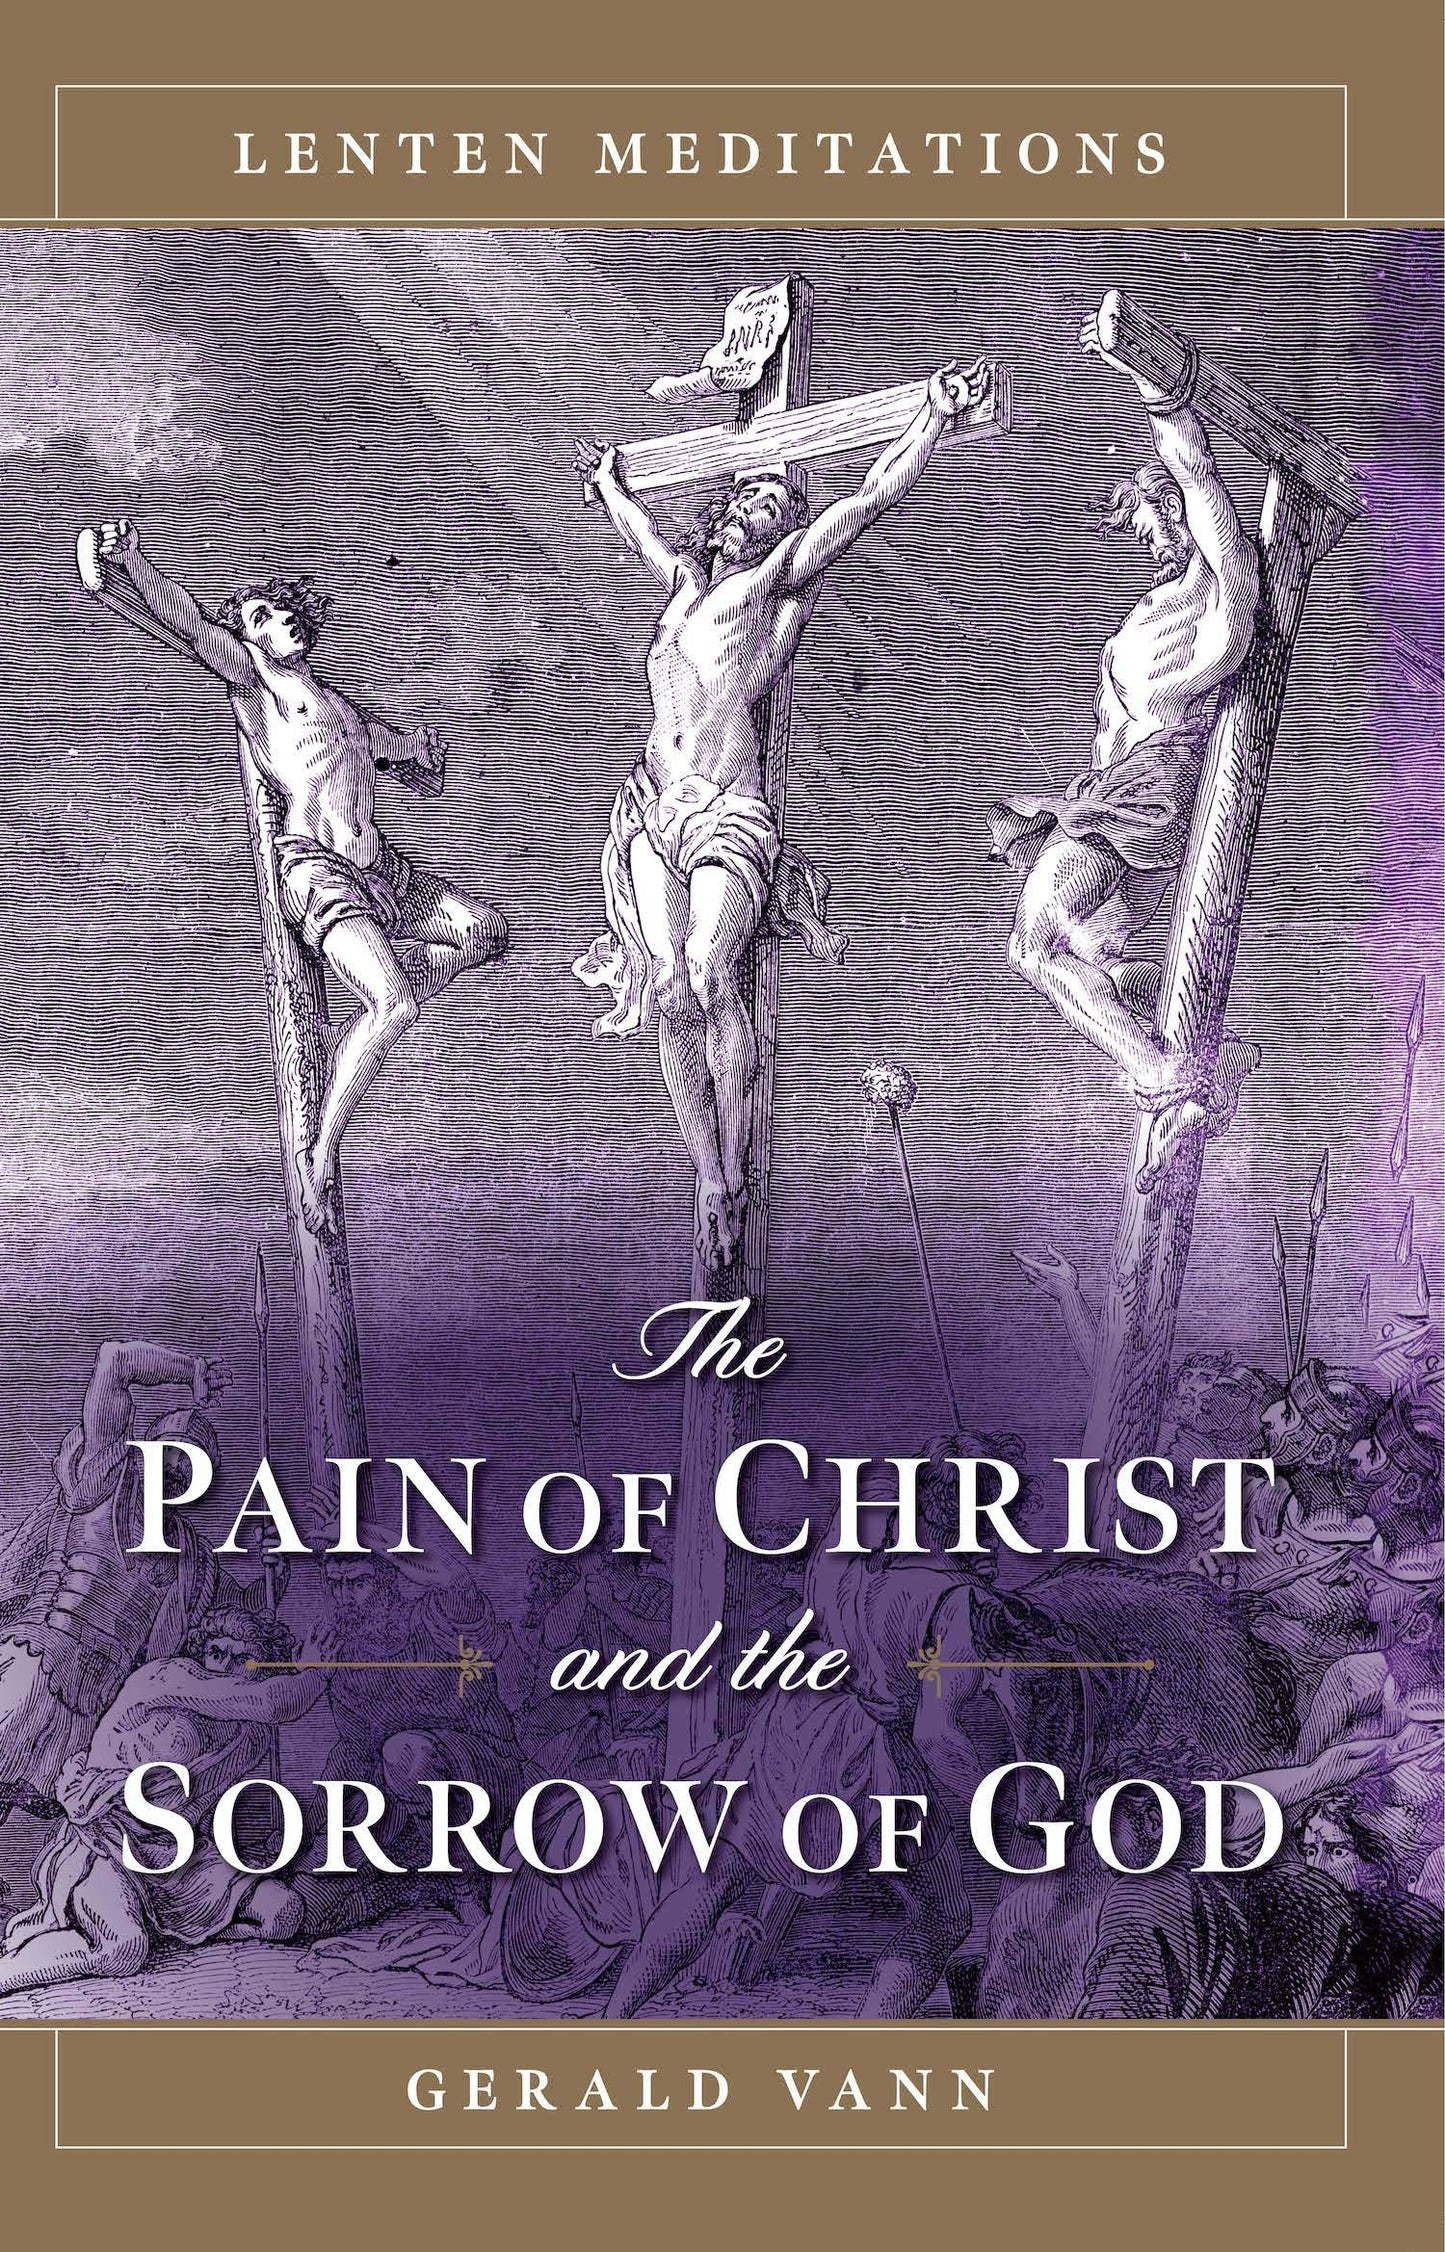 Vann, Gerald: The Pain of Christ and the Sorrow of God